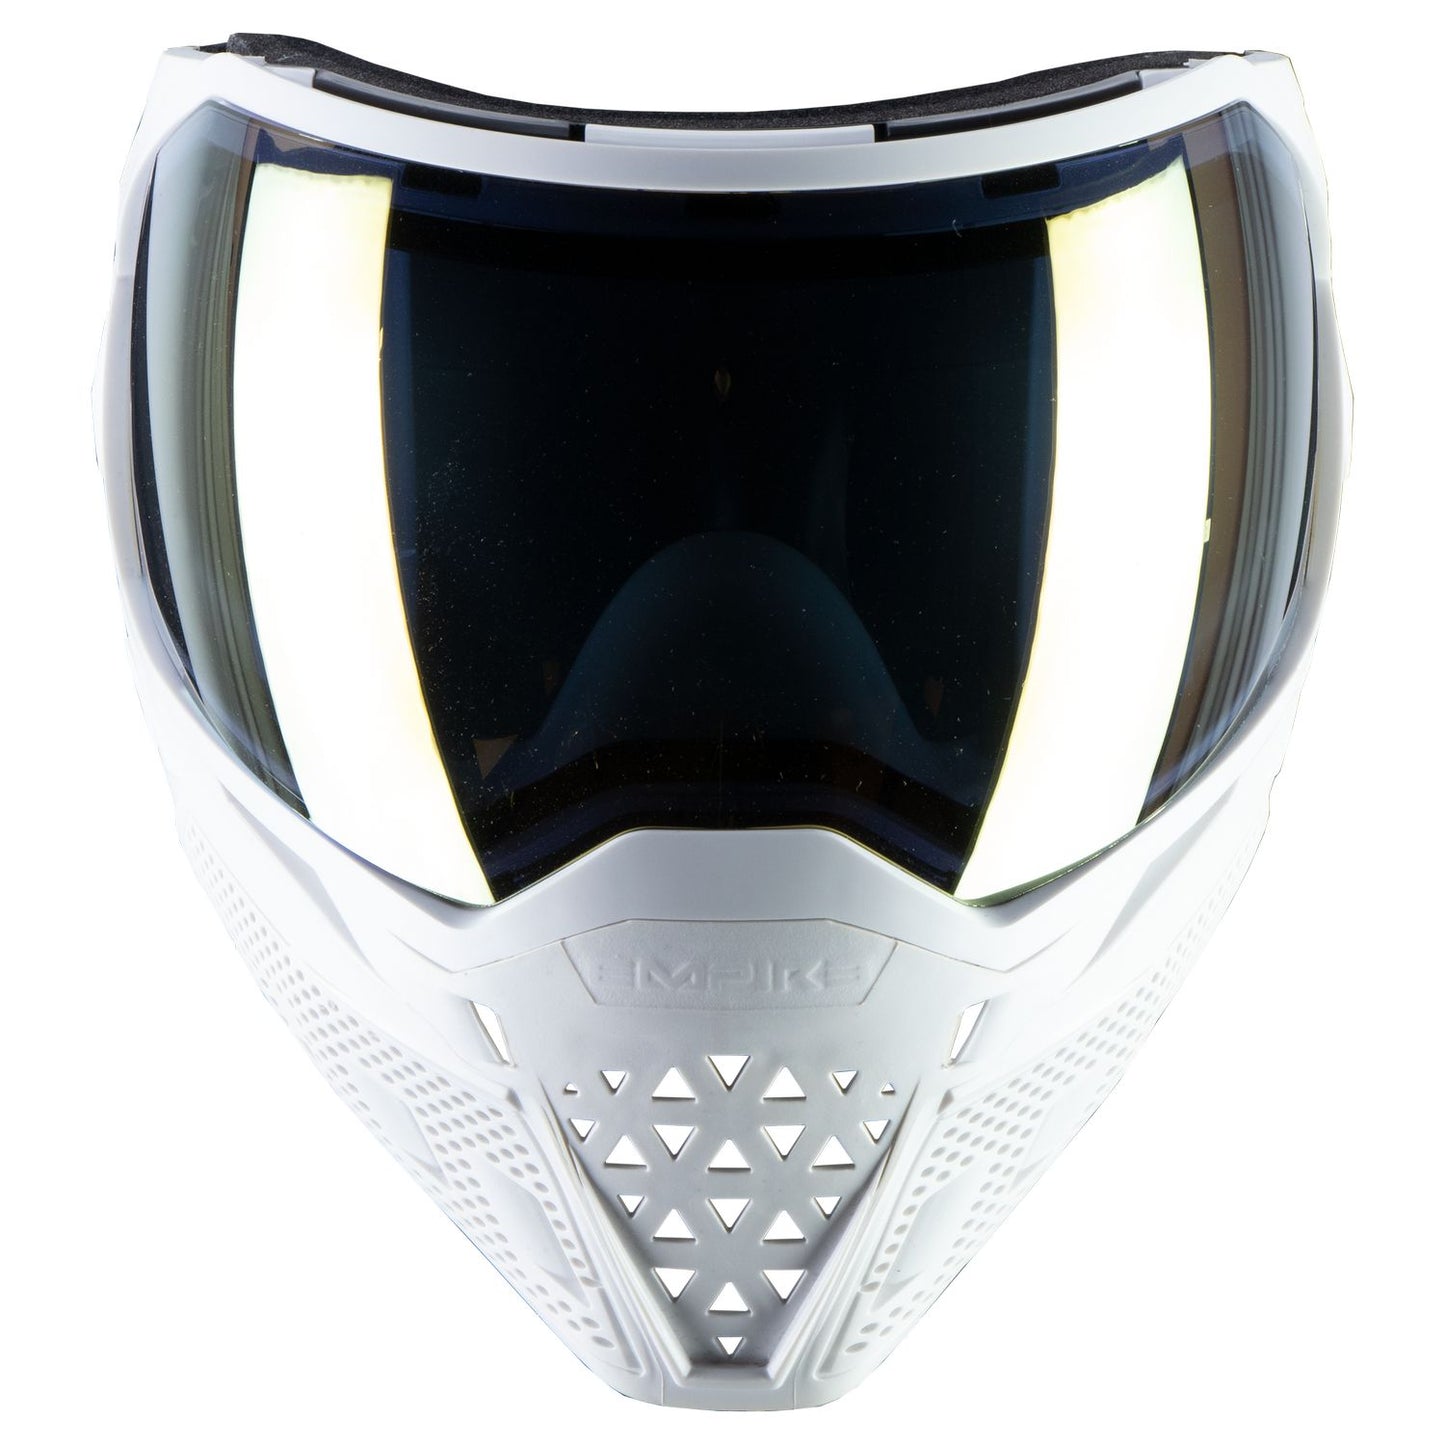 Empire EVS Enhanced Vision System Goggle - White - Includes 2 lenses